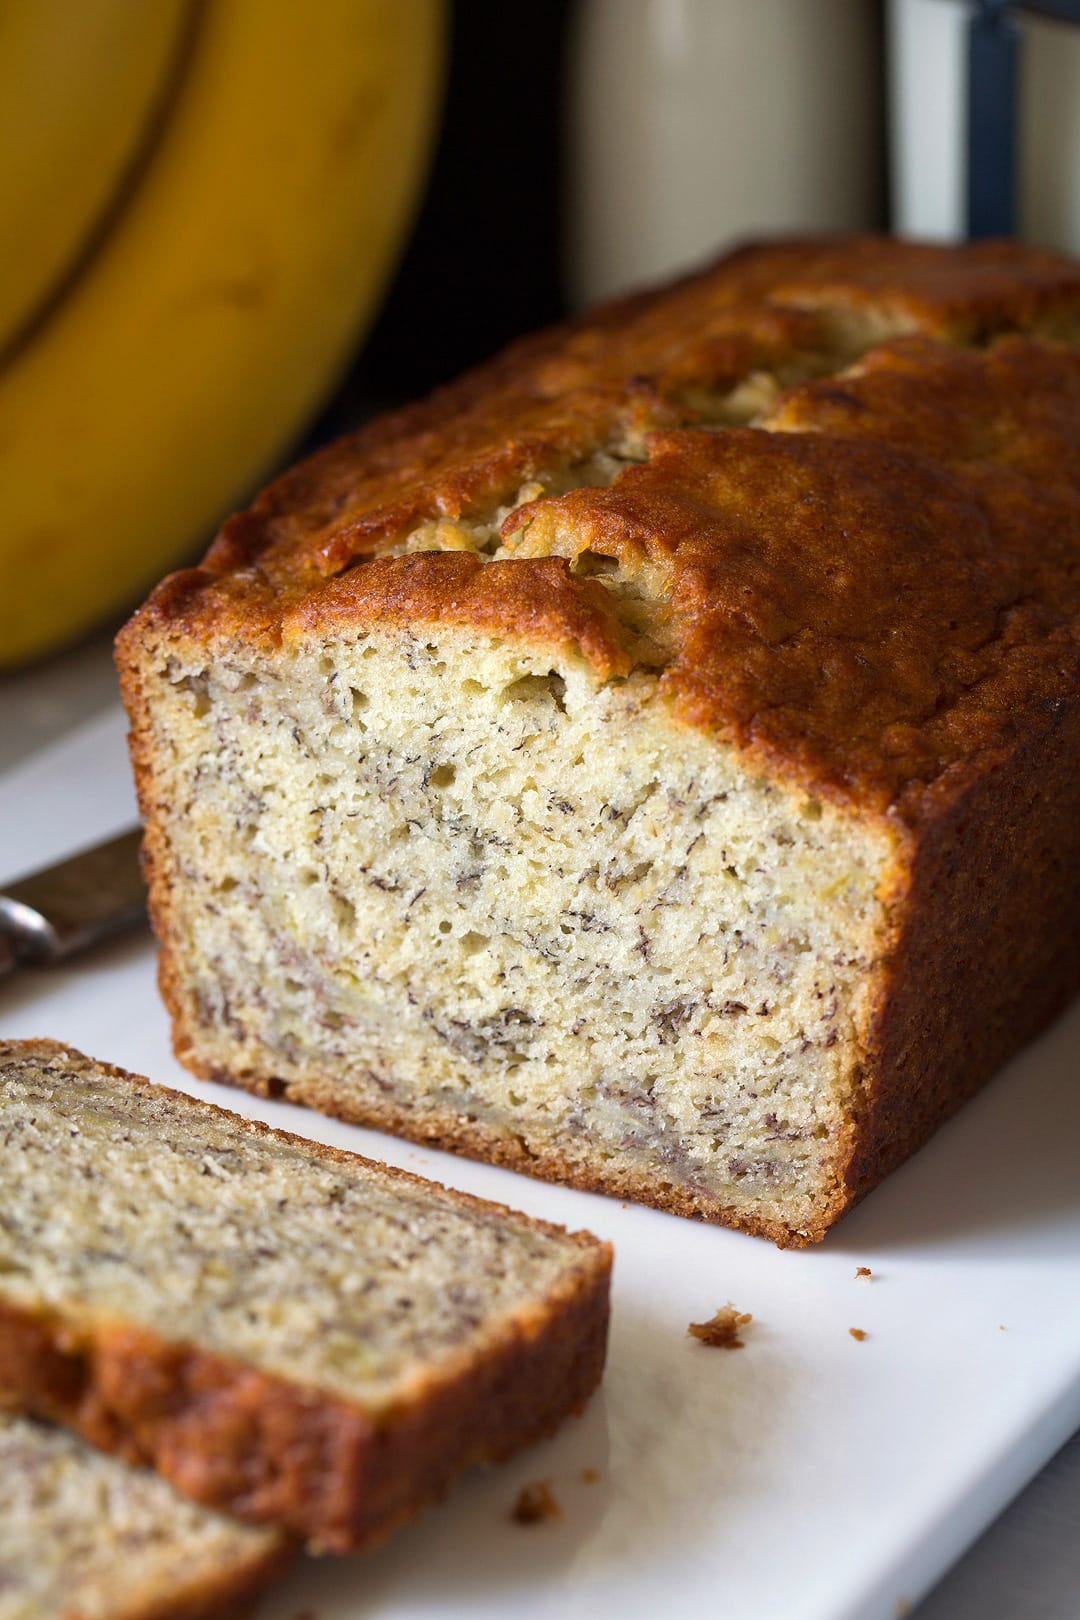 Banana Bread Recipe {with Video!} - Cooking Classy